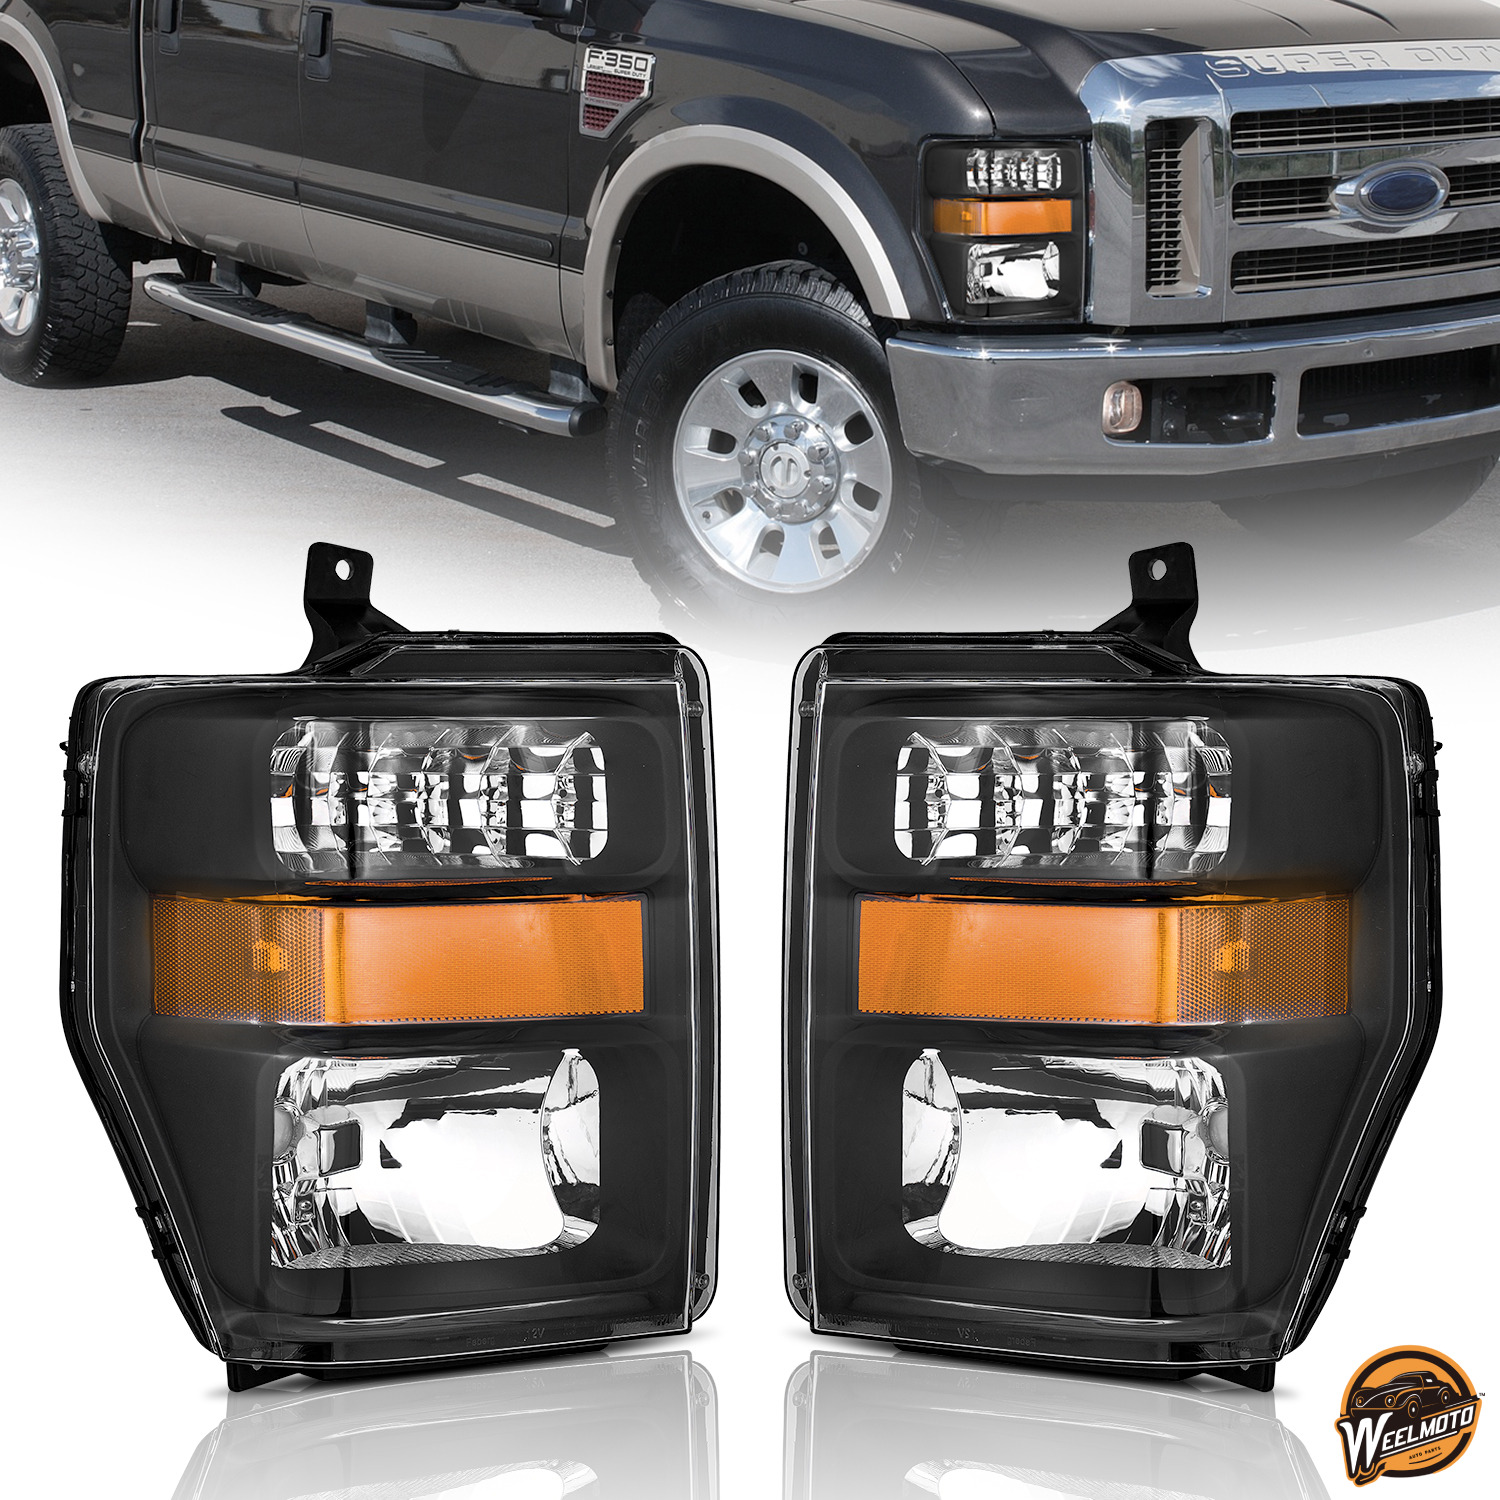 WEELMOTO Headlights For 2008-2010 Ford F250 F350 F450 F550 Super Duty Pair Lamps